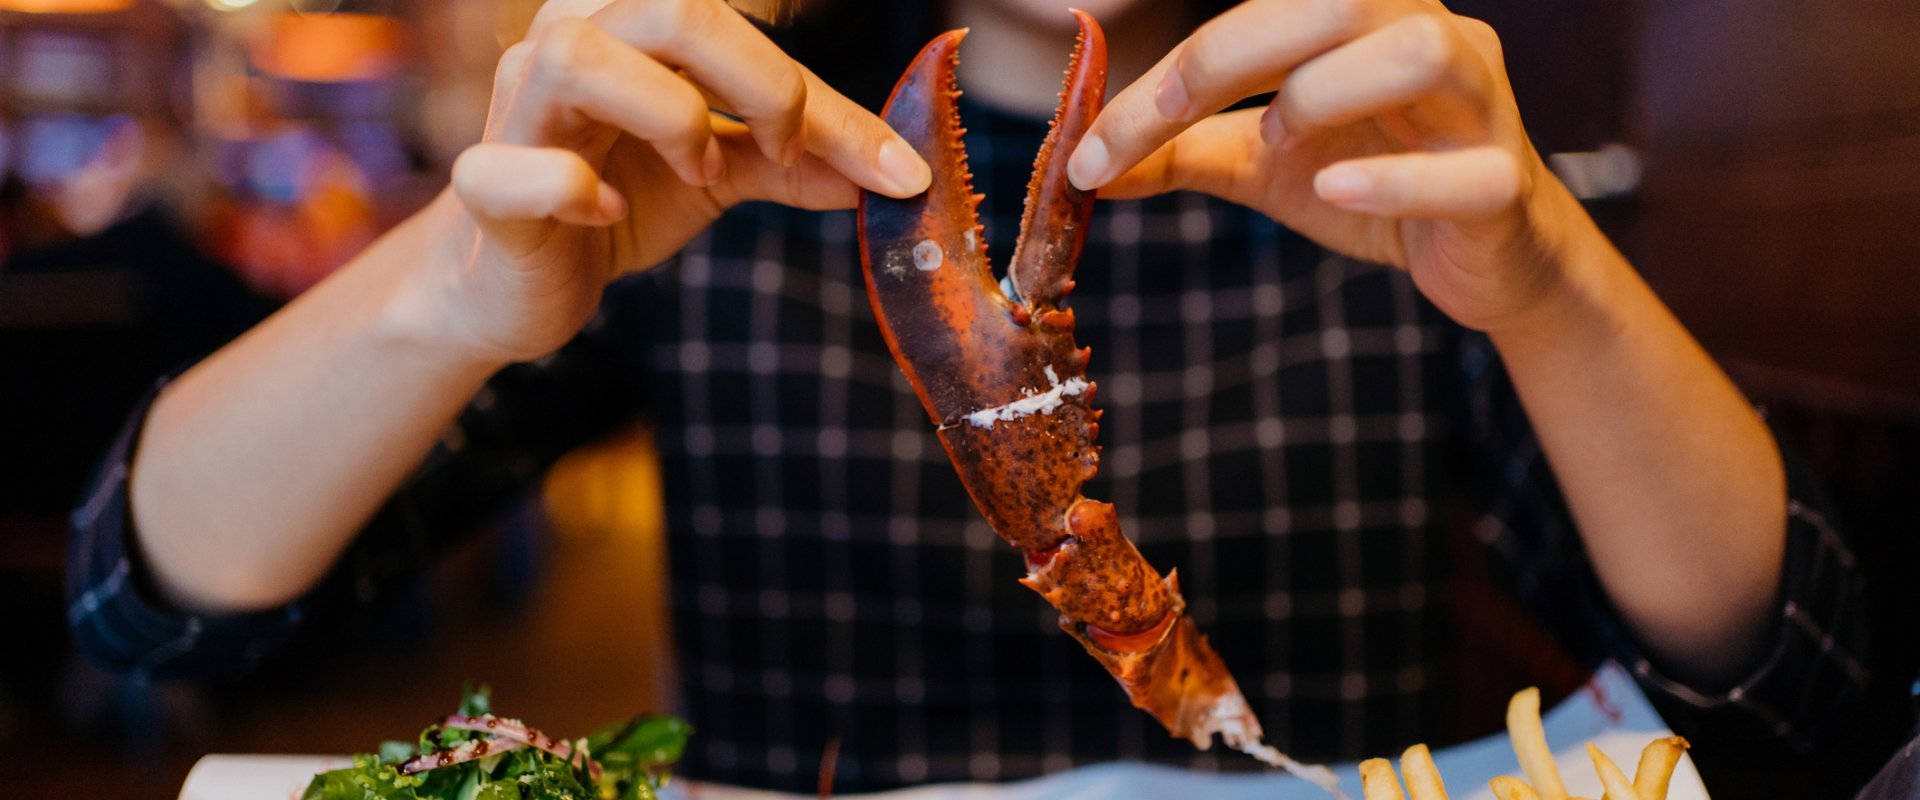 A person cracking a lobster claw